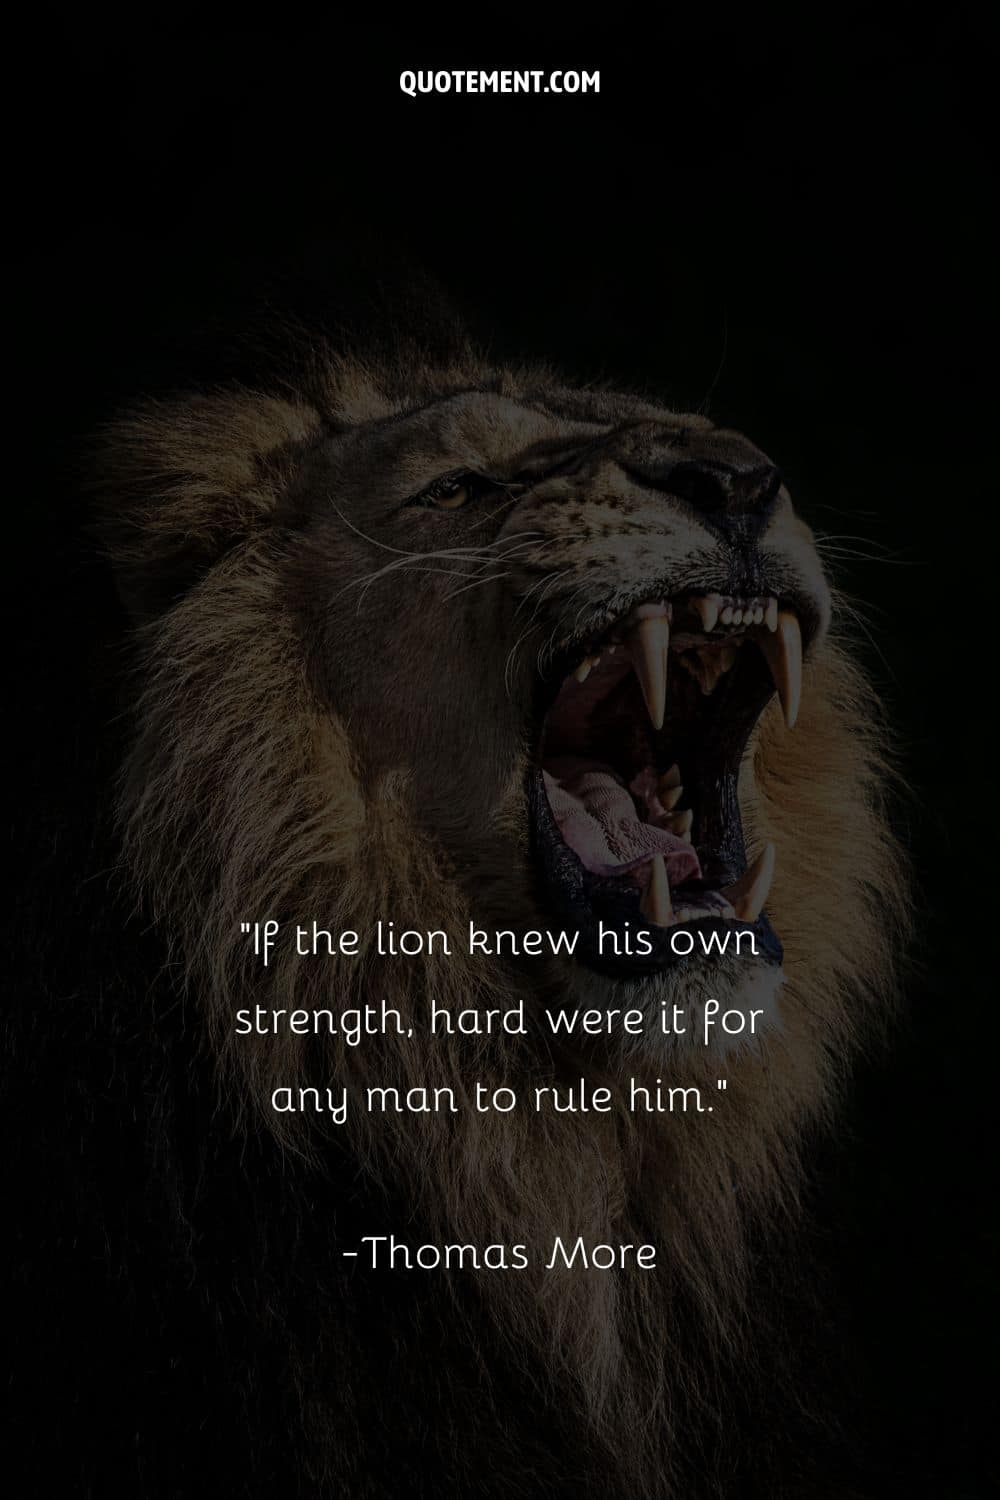 If the lion knew his own strength, hard were it for any man to rule him